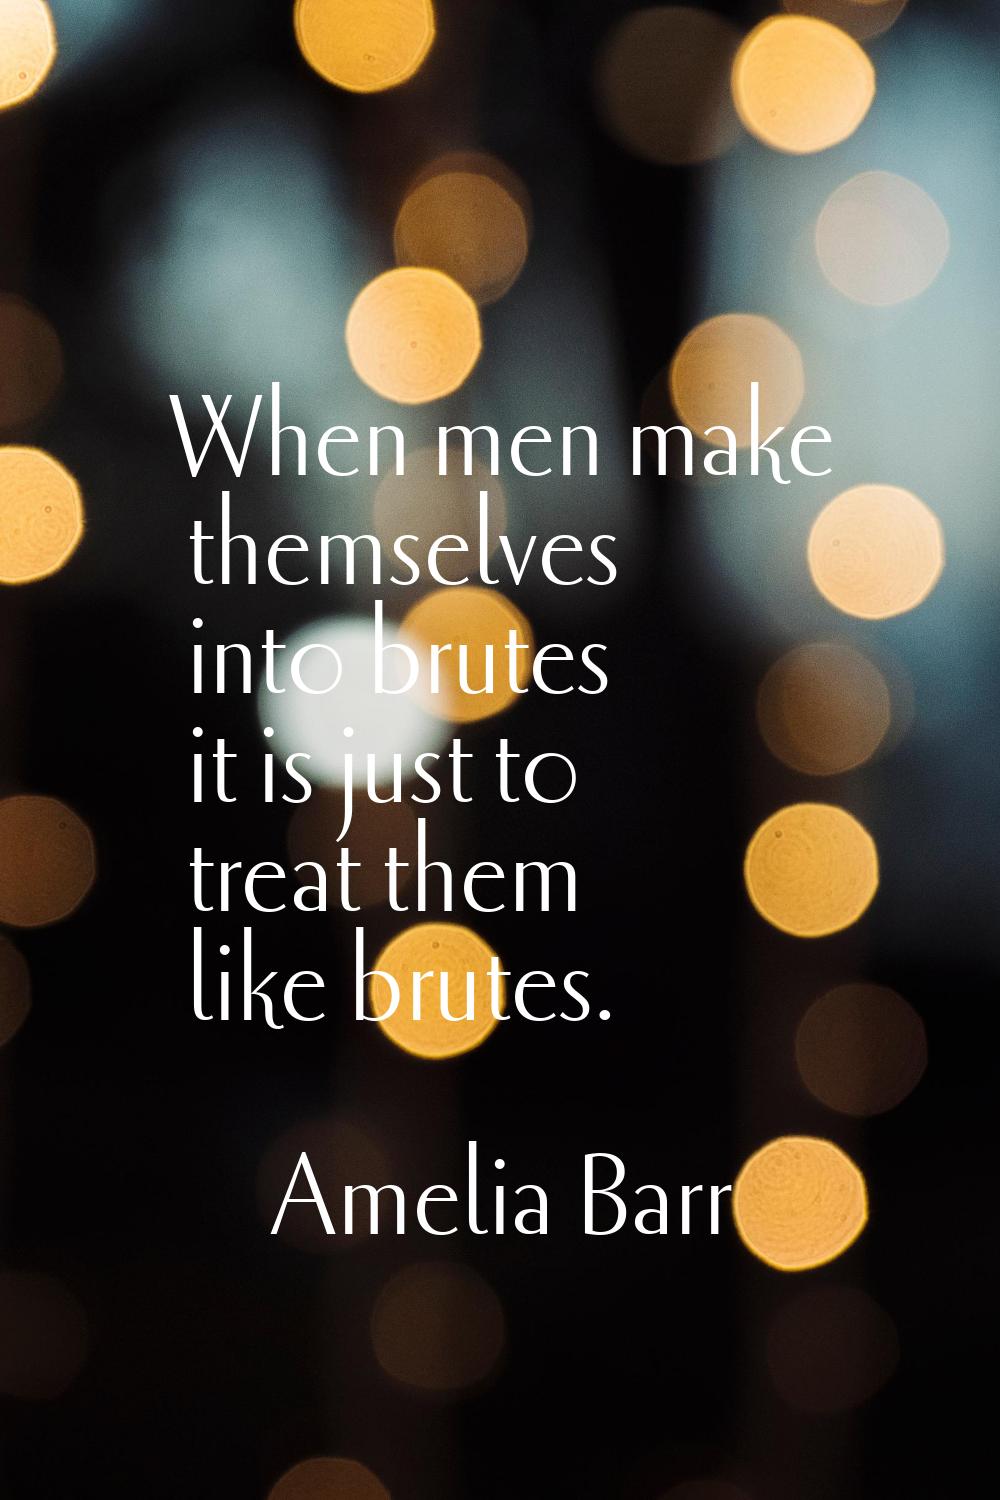 When men make themselves into brutes it is just to treat them like brutes.